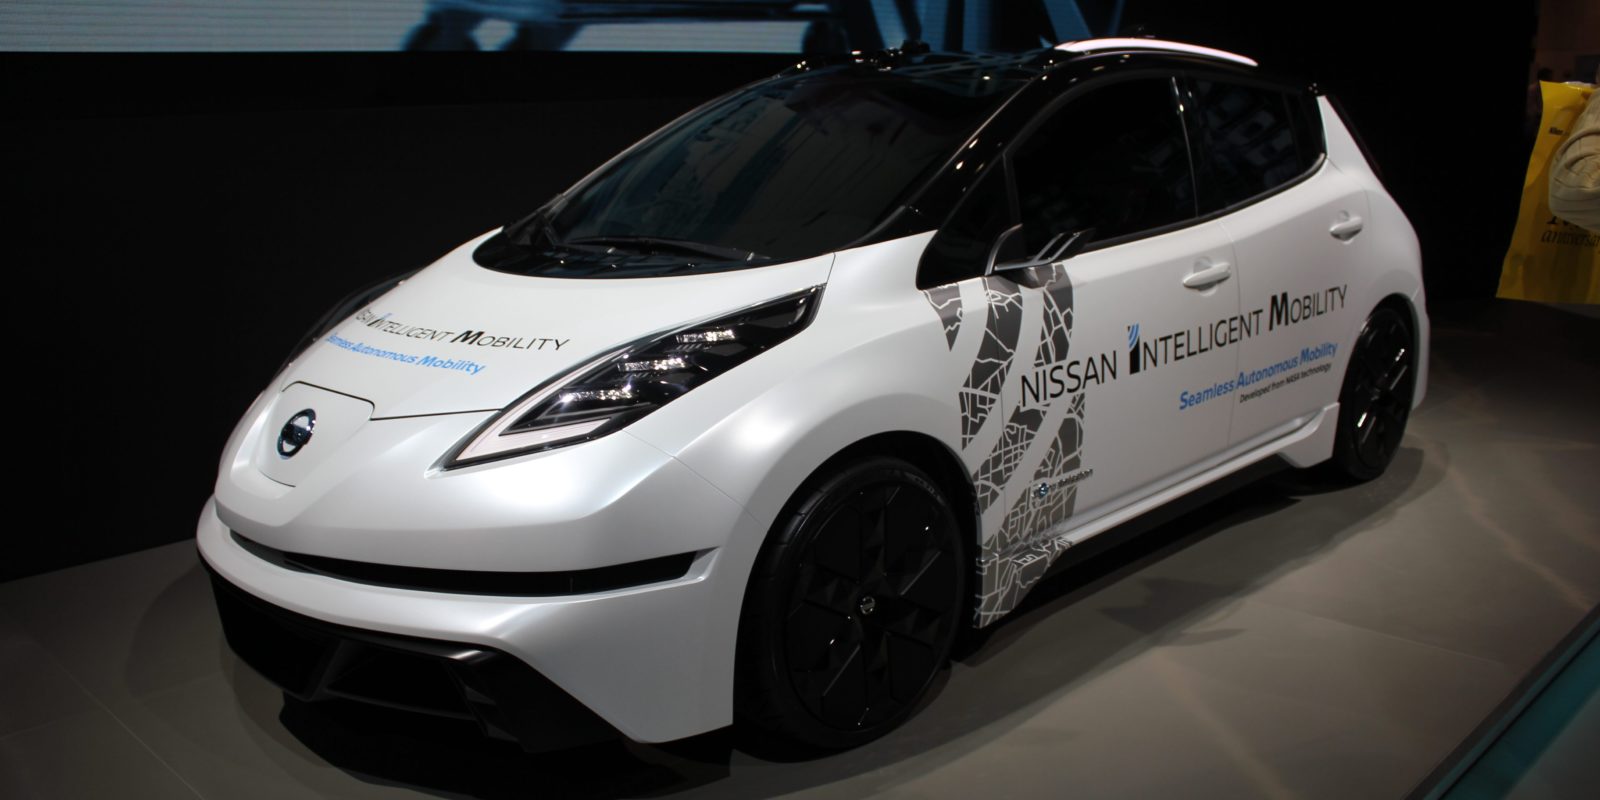 Nissan confirms that the ‘new LEAF’ will get a range of 200 miles, ProPILOT, and it’s coming in ‘near future’